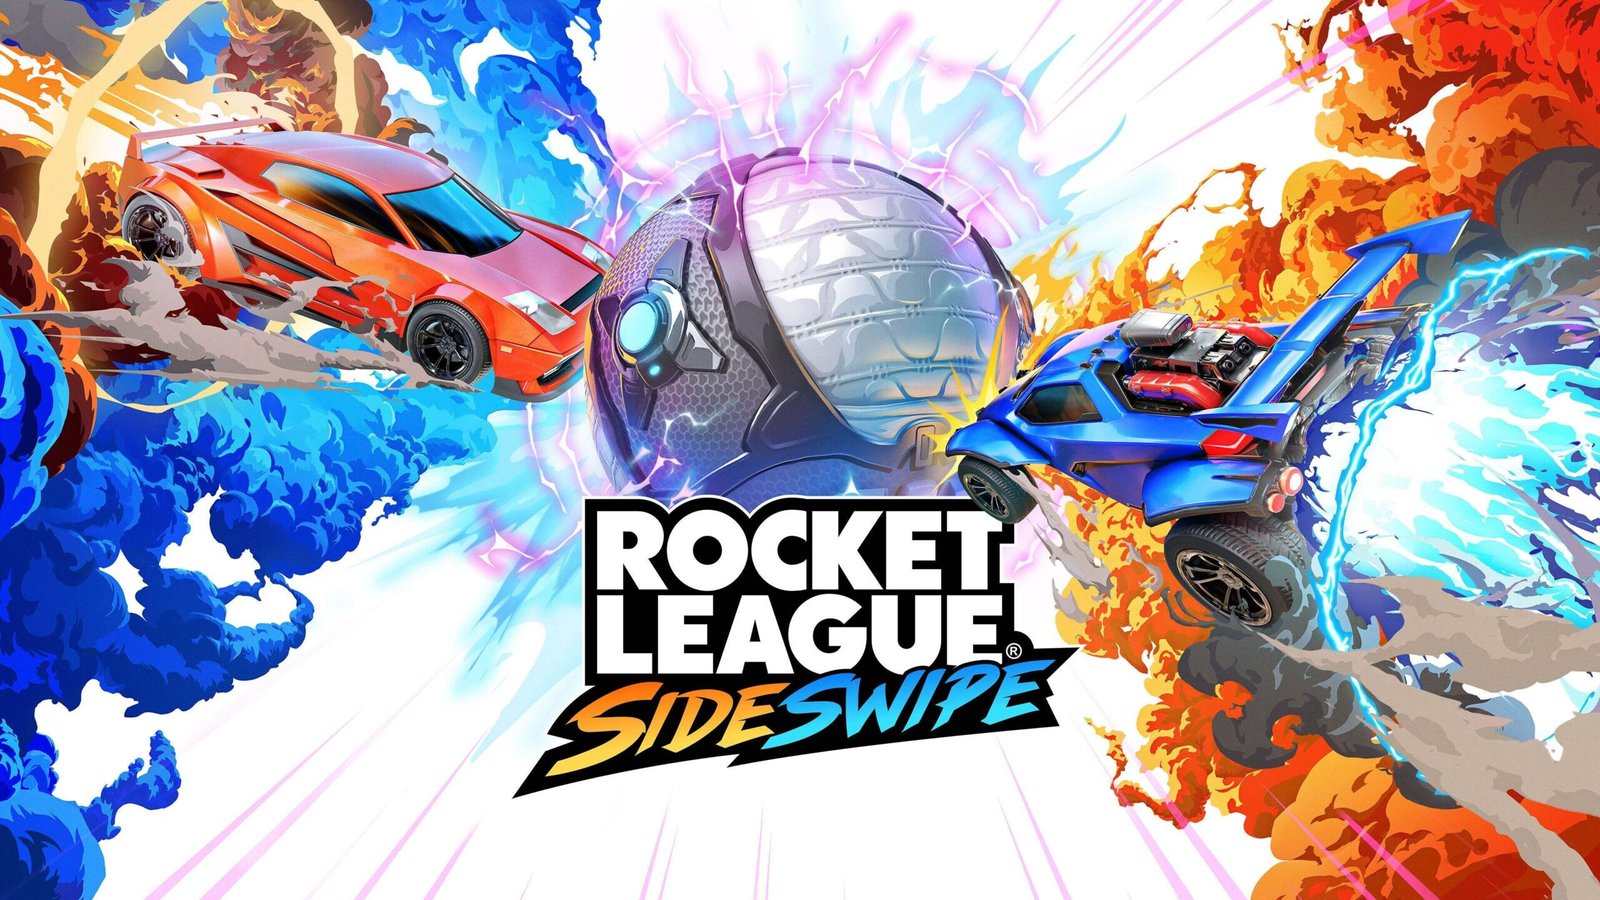 Rocket-League-Sideswipe-released-worldwide-on-iOS-and-Android